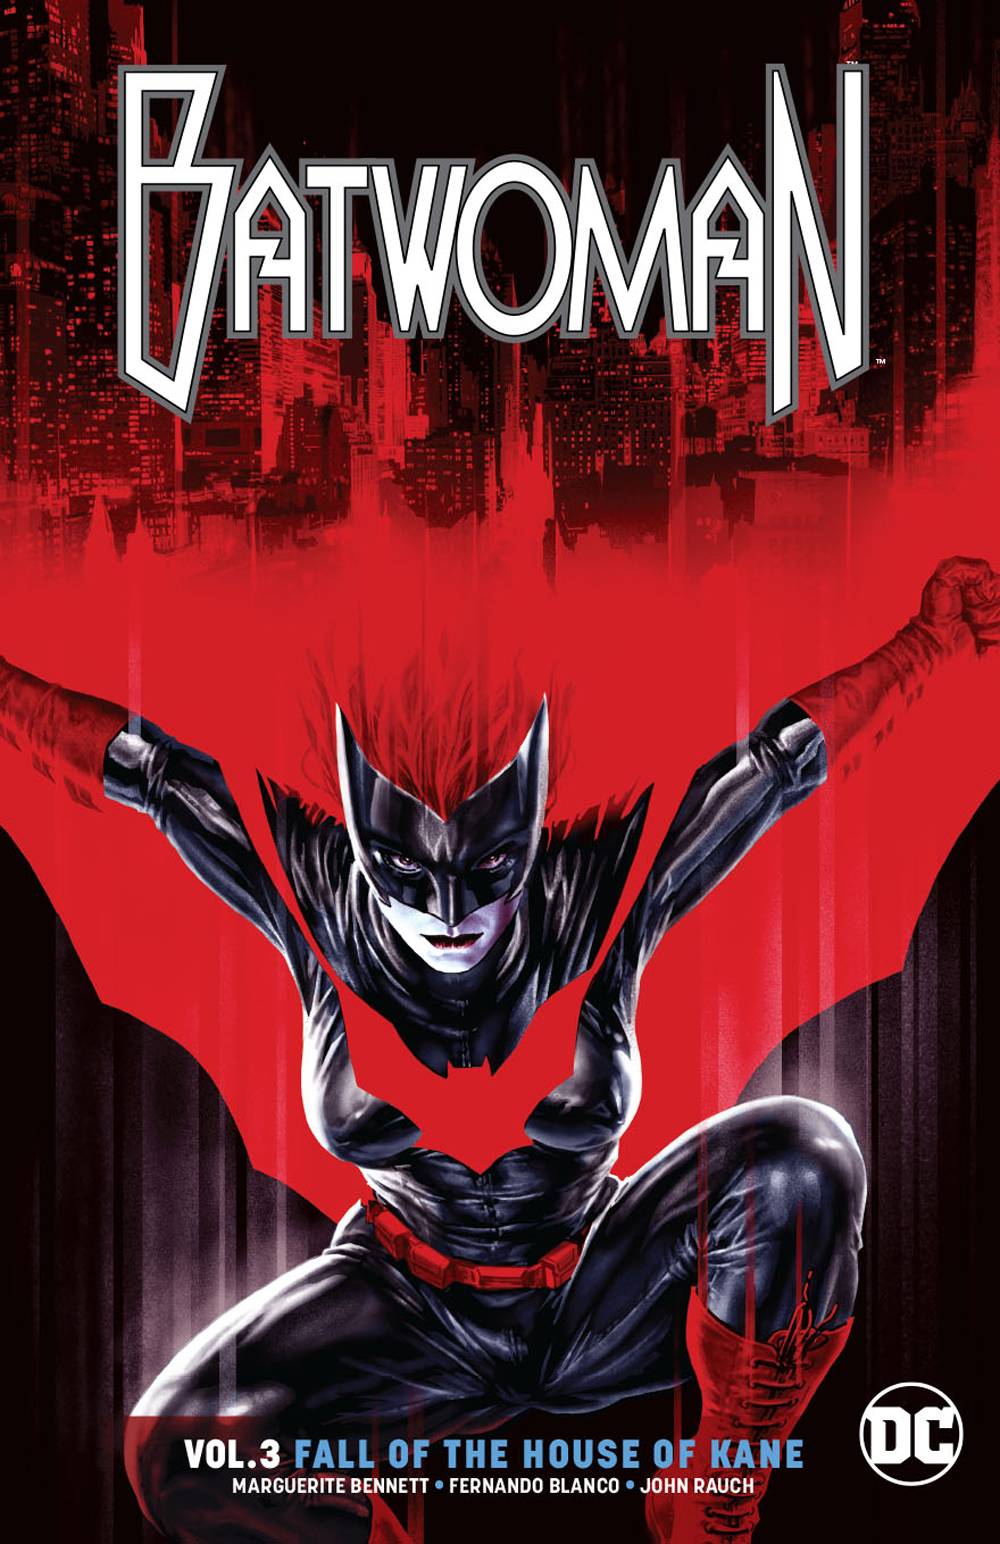 Batwoman Graphic Novel Volume 3 Fall of the House of Kane